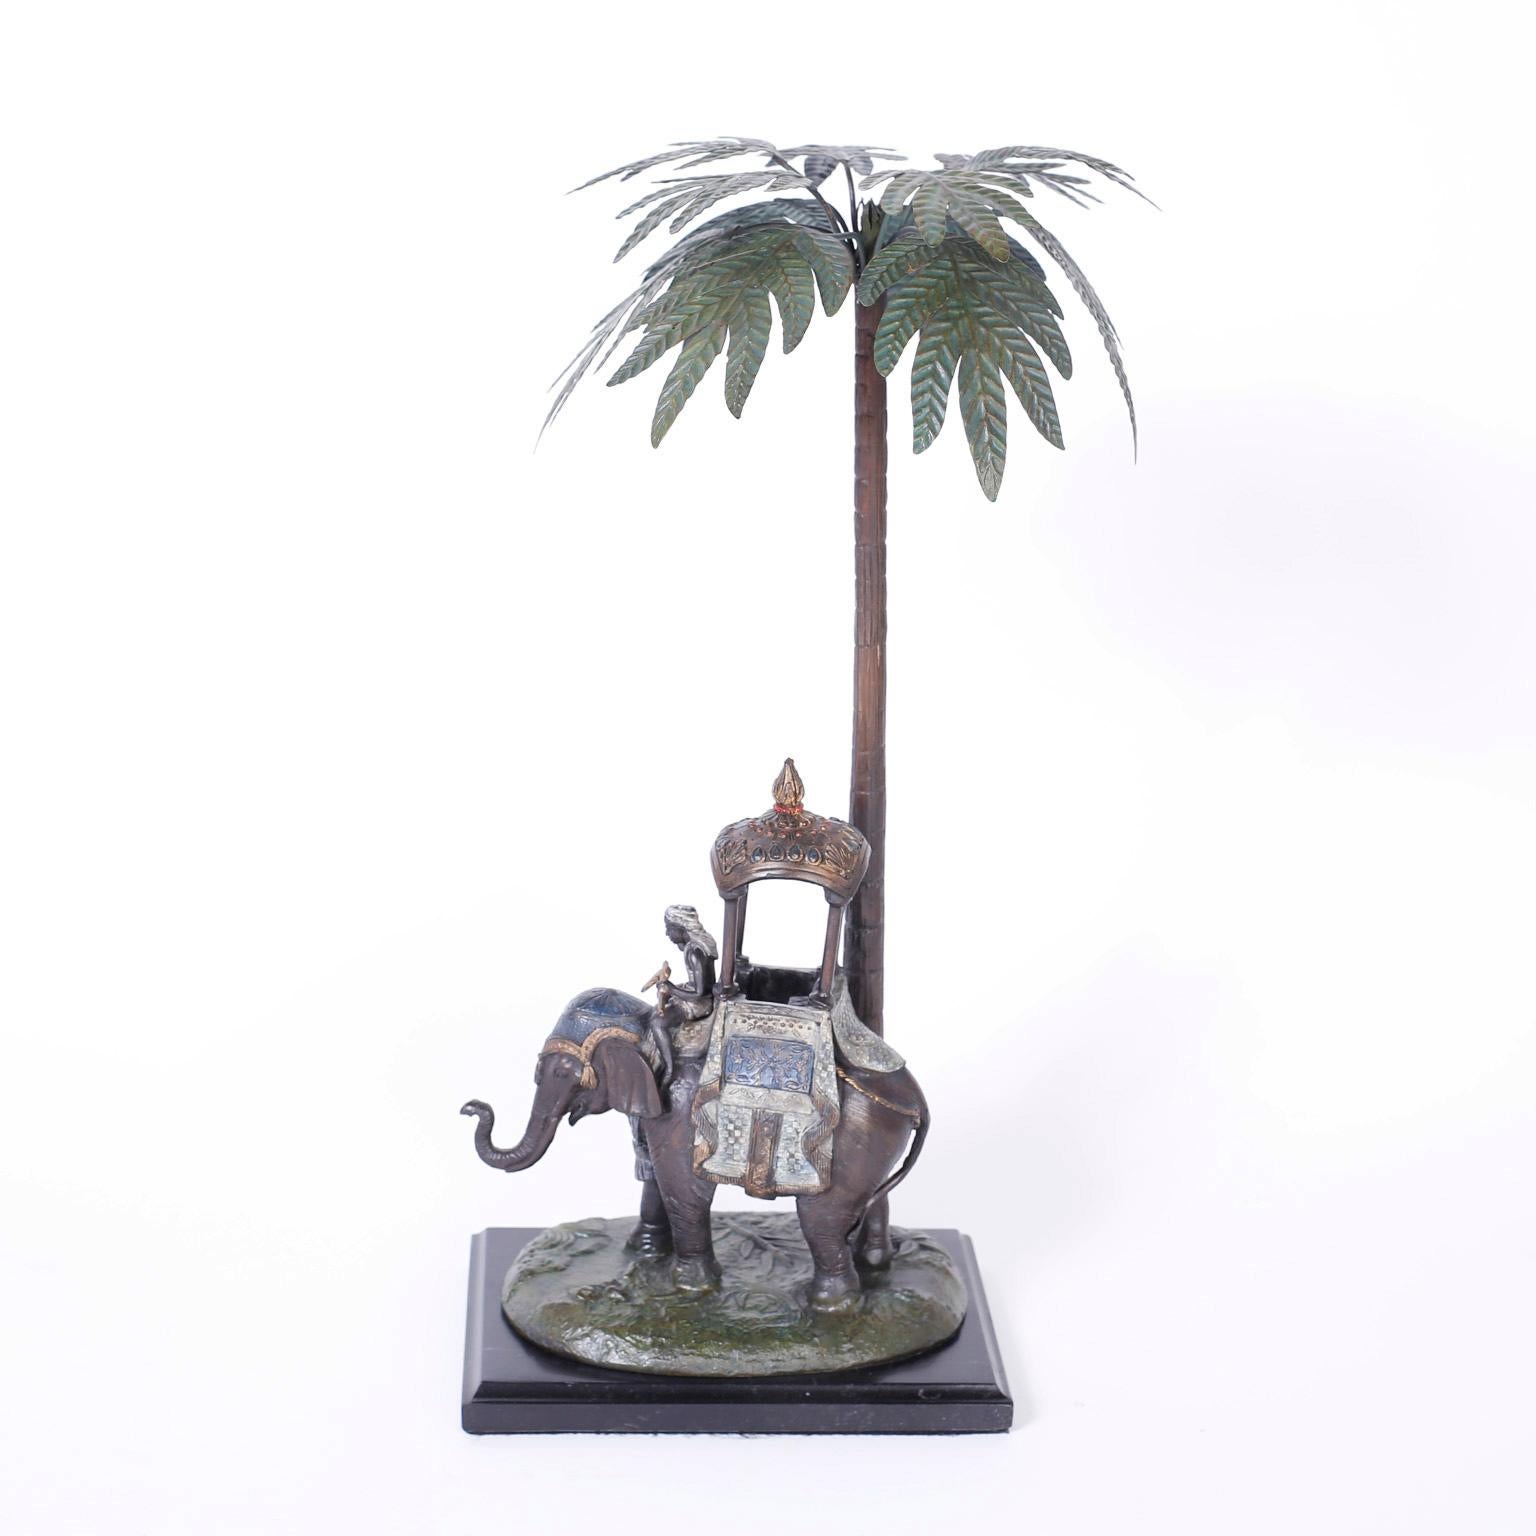 Transporting cold-painted Austrian metal elephant with a fanciful howdah and driver on a patch of terra firma under a Palm Tree with tole leaves.